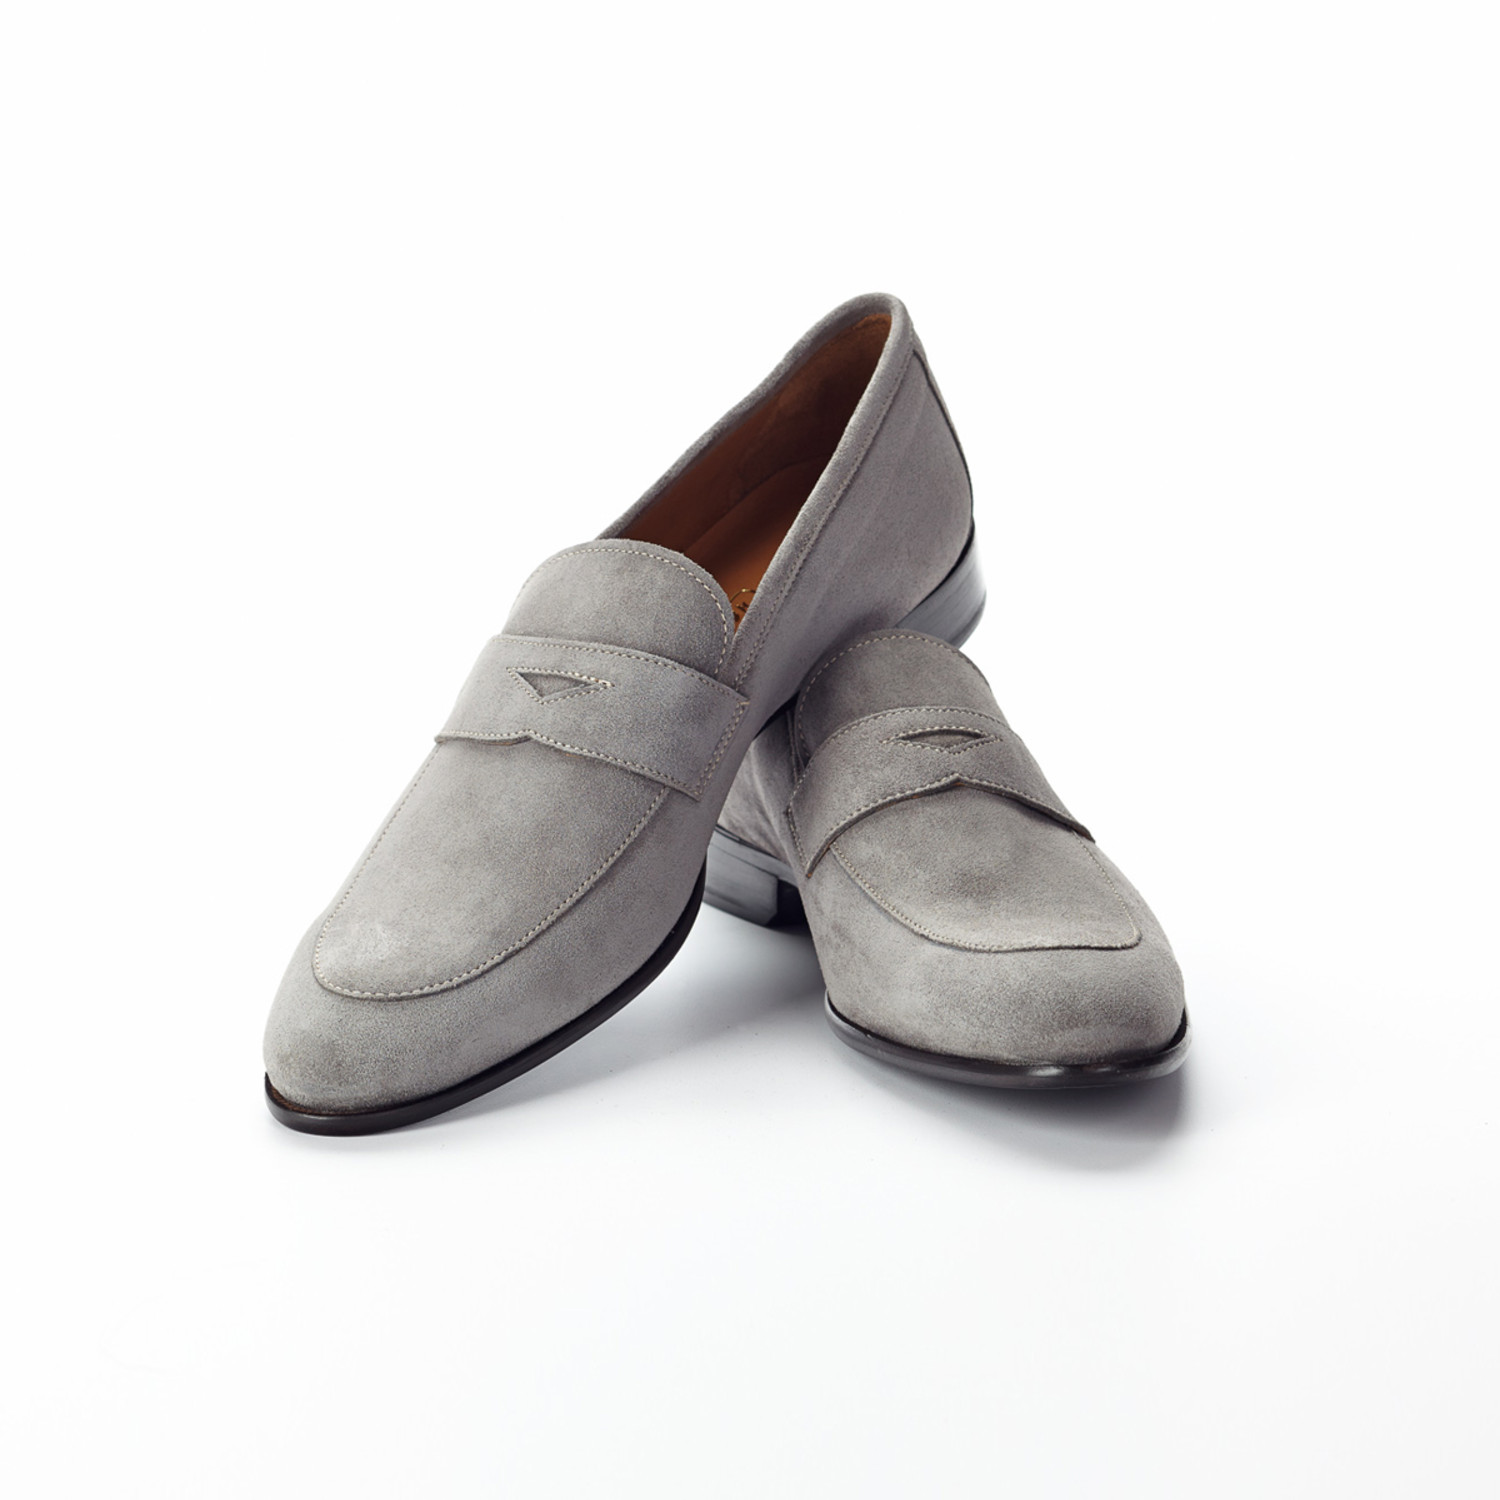 grey suede penny loafers